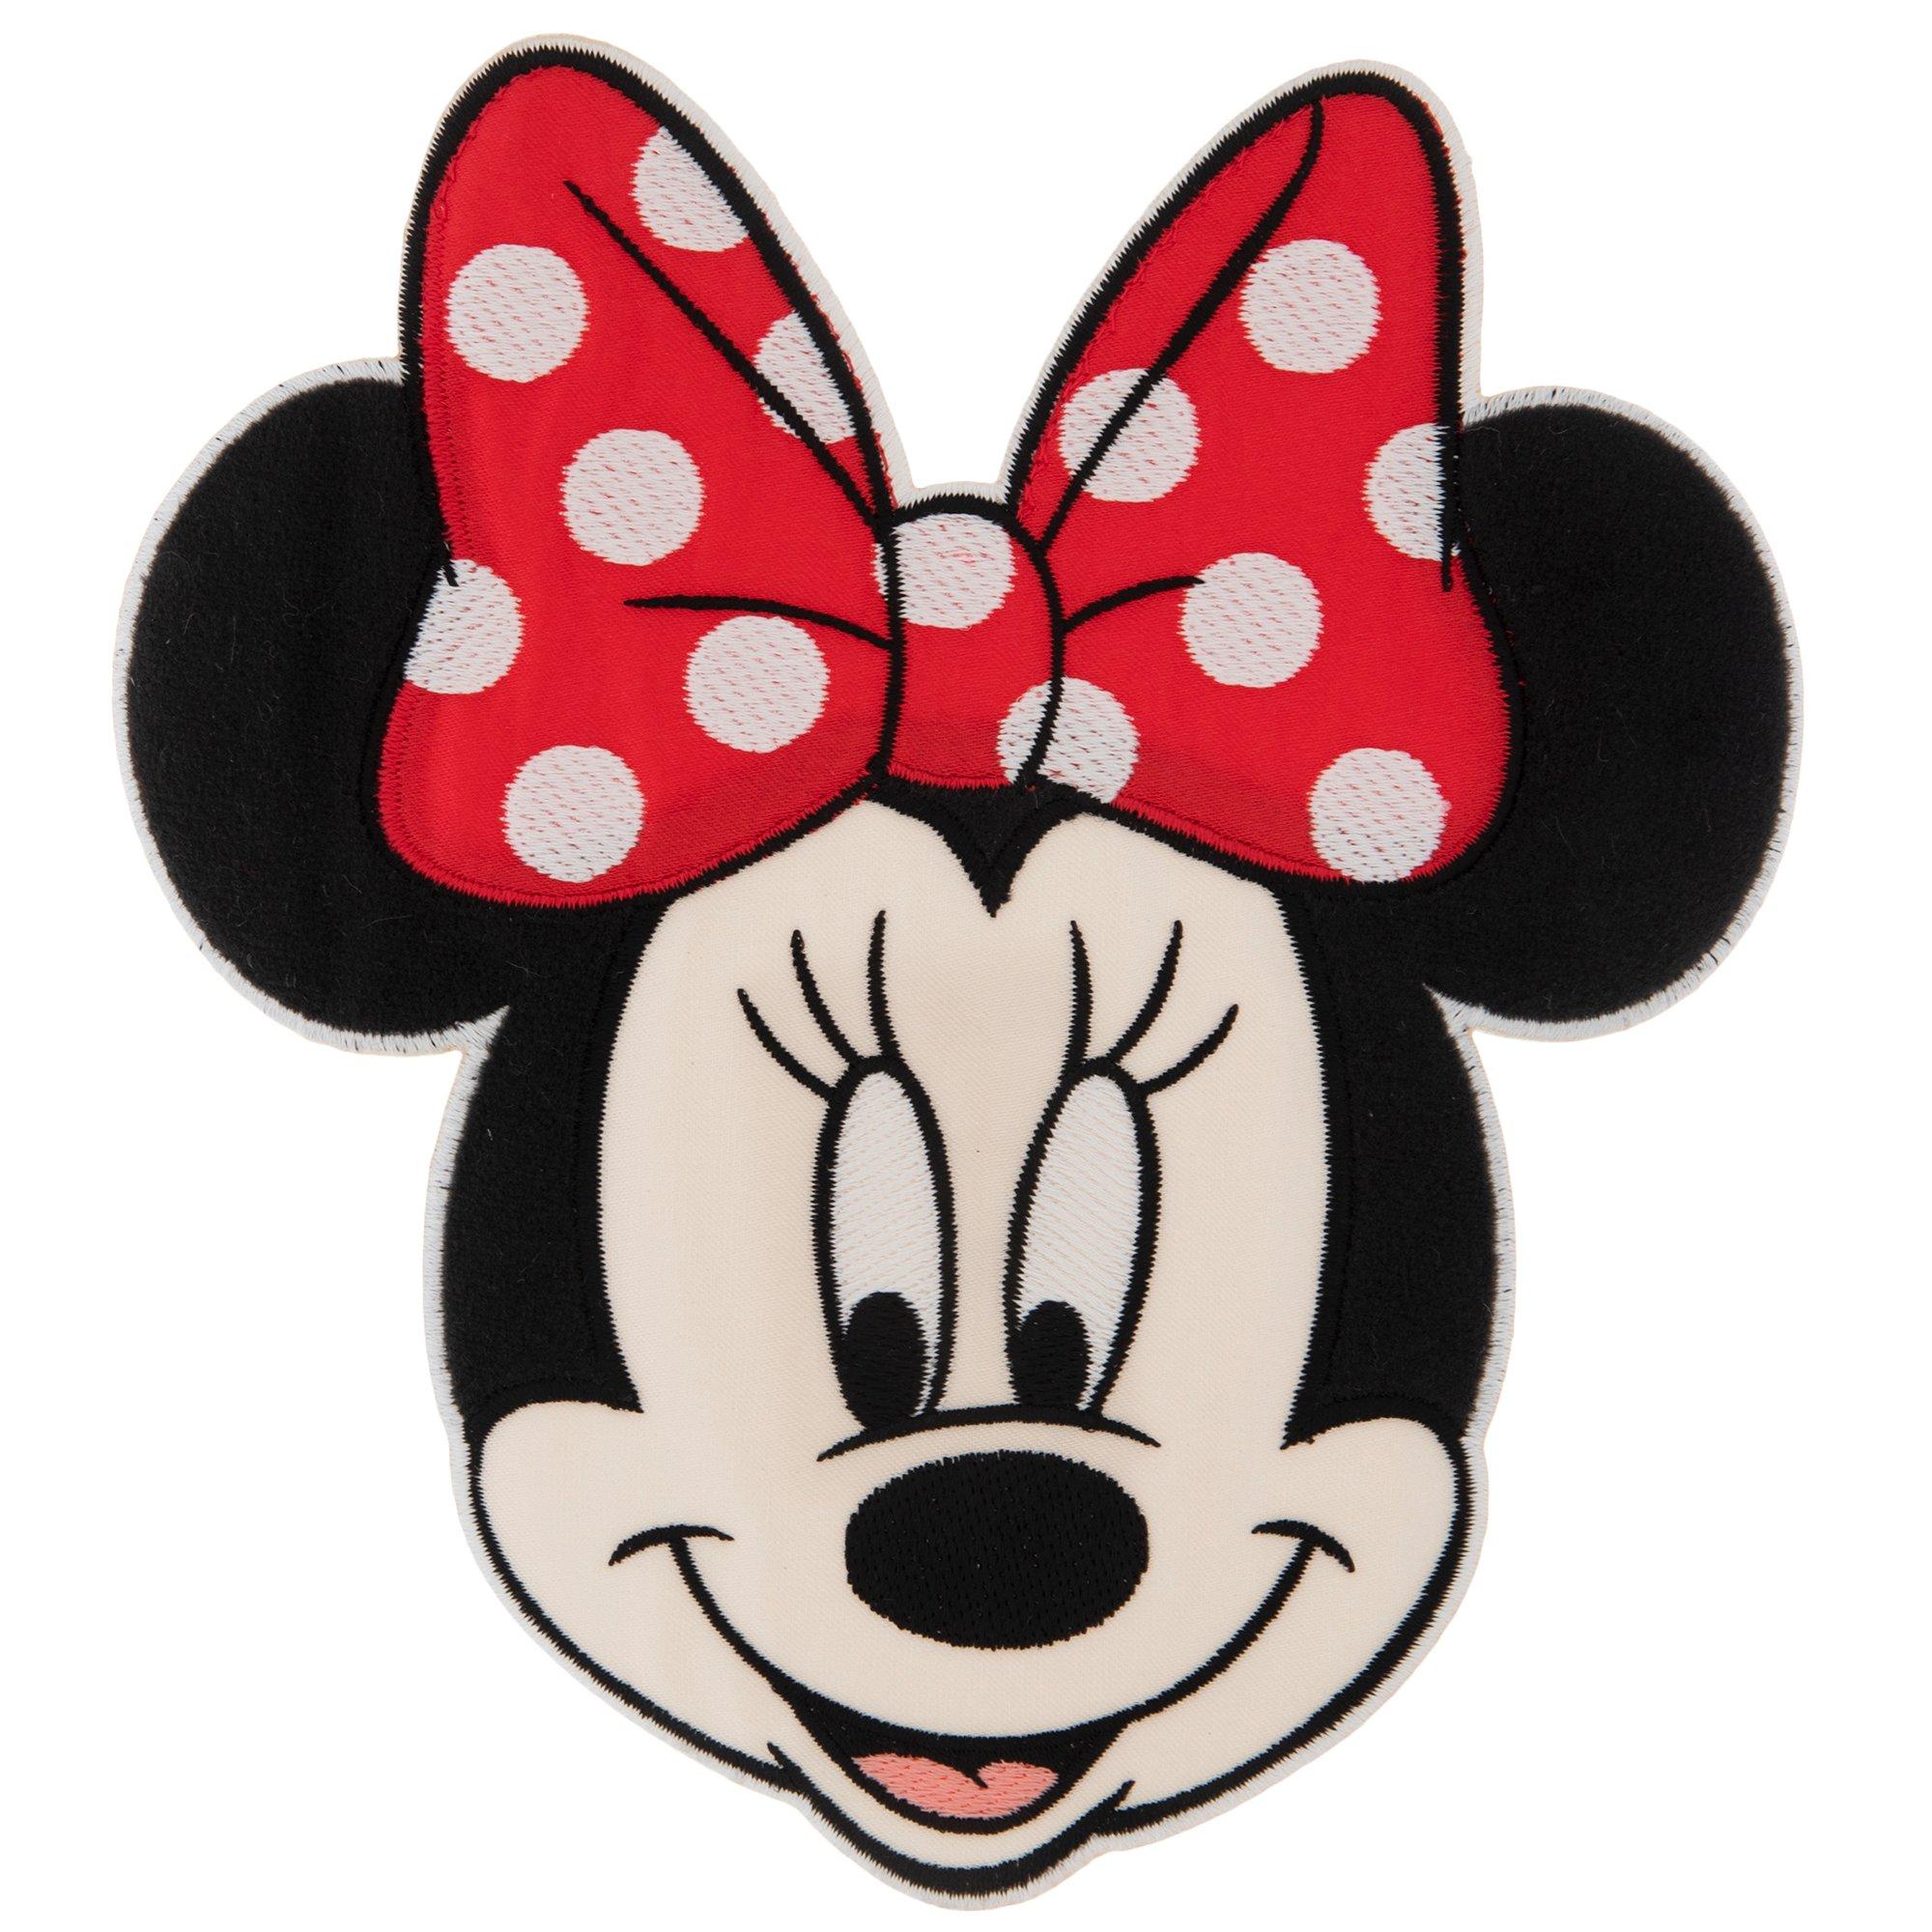 Disney Mickey Minnie Mouse Embroidered Patches on Clothes for Children  Stickers Cartoon DIY Sewing Pant Bag Clothing Kawaii Gift